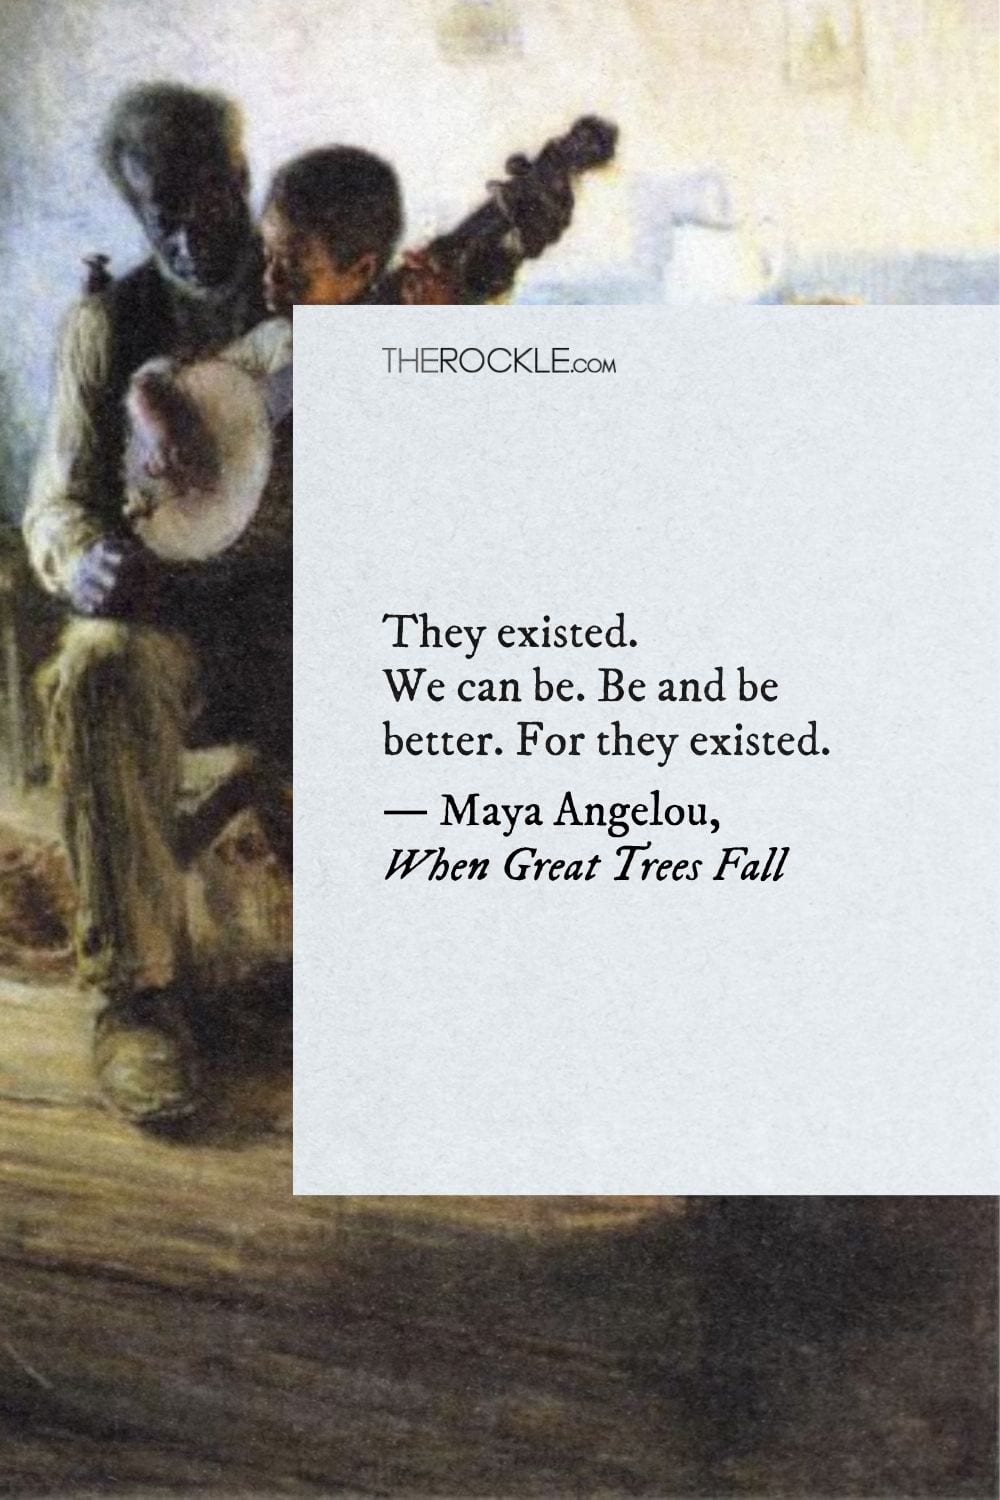 Quote from When Great Trees Fall